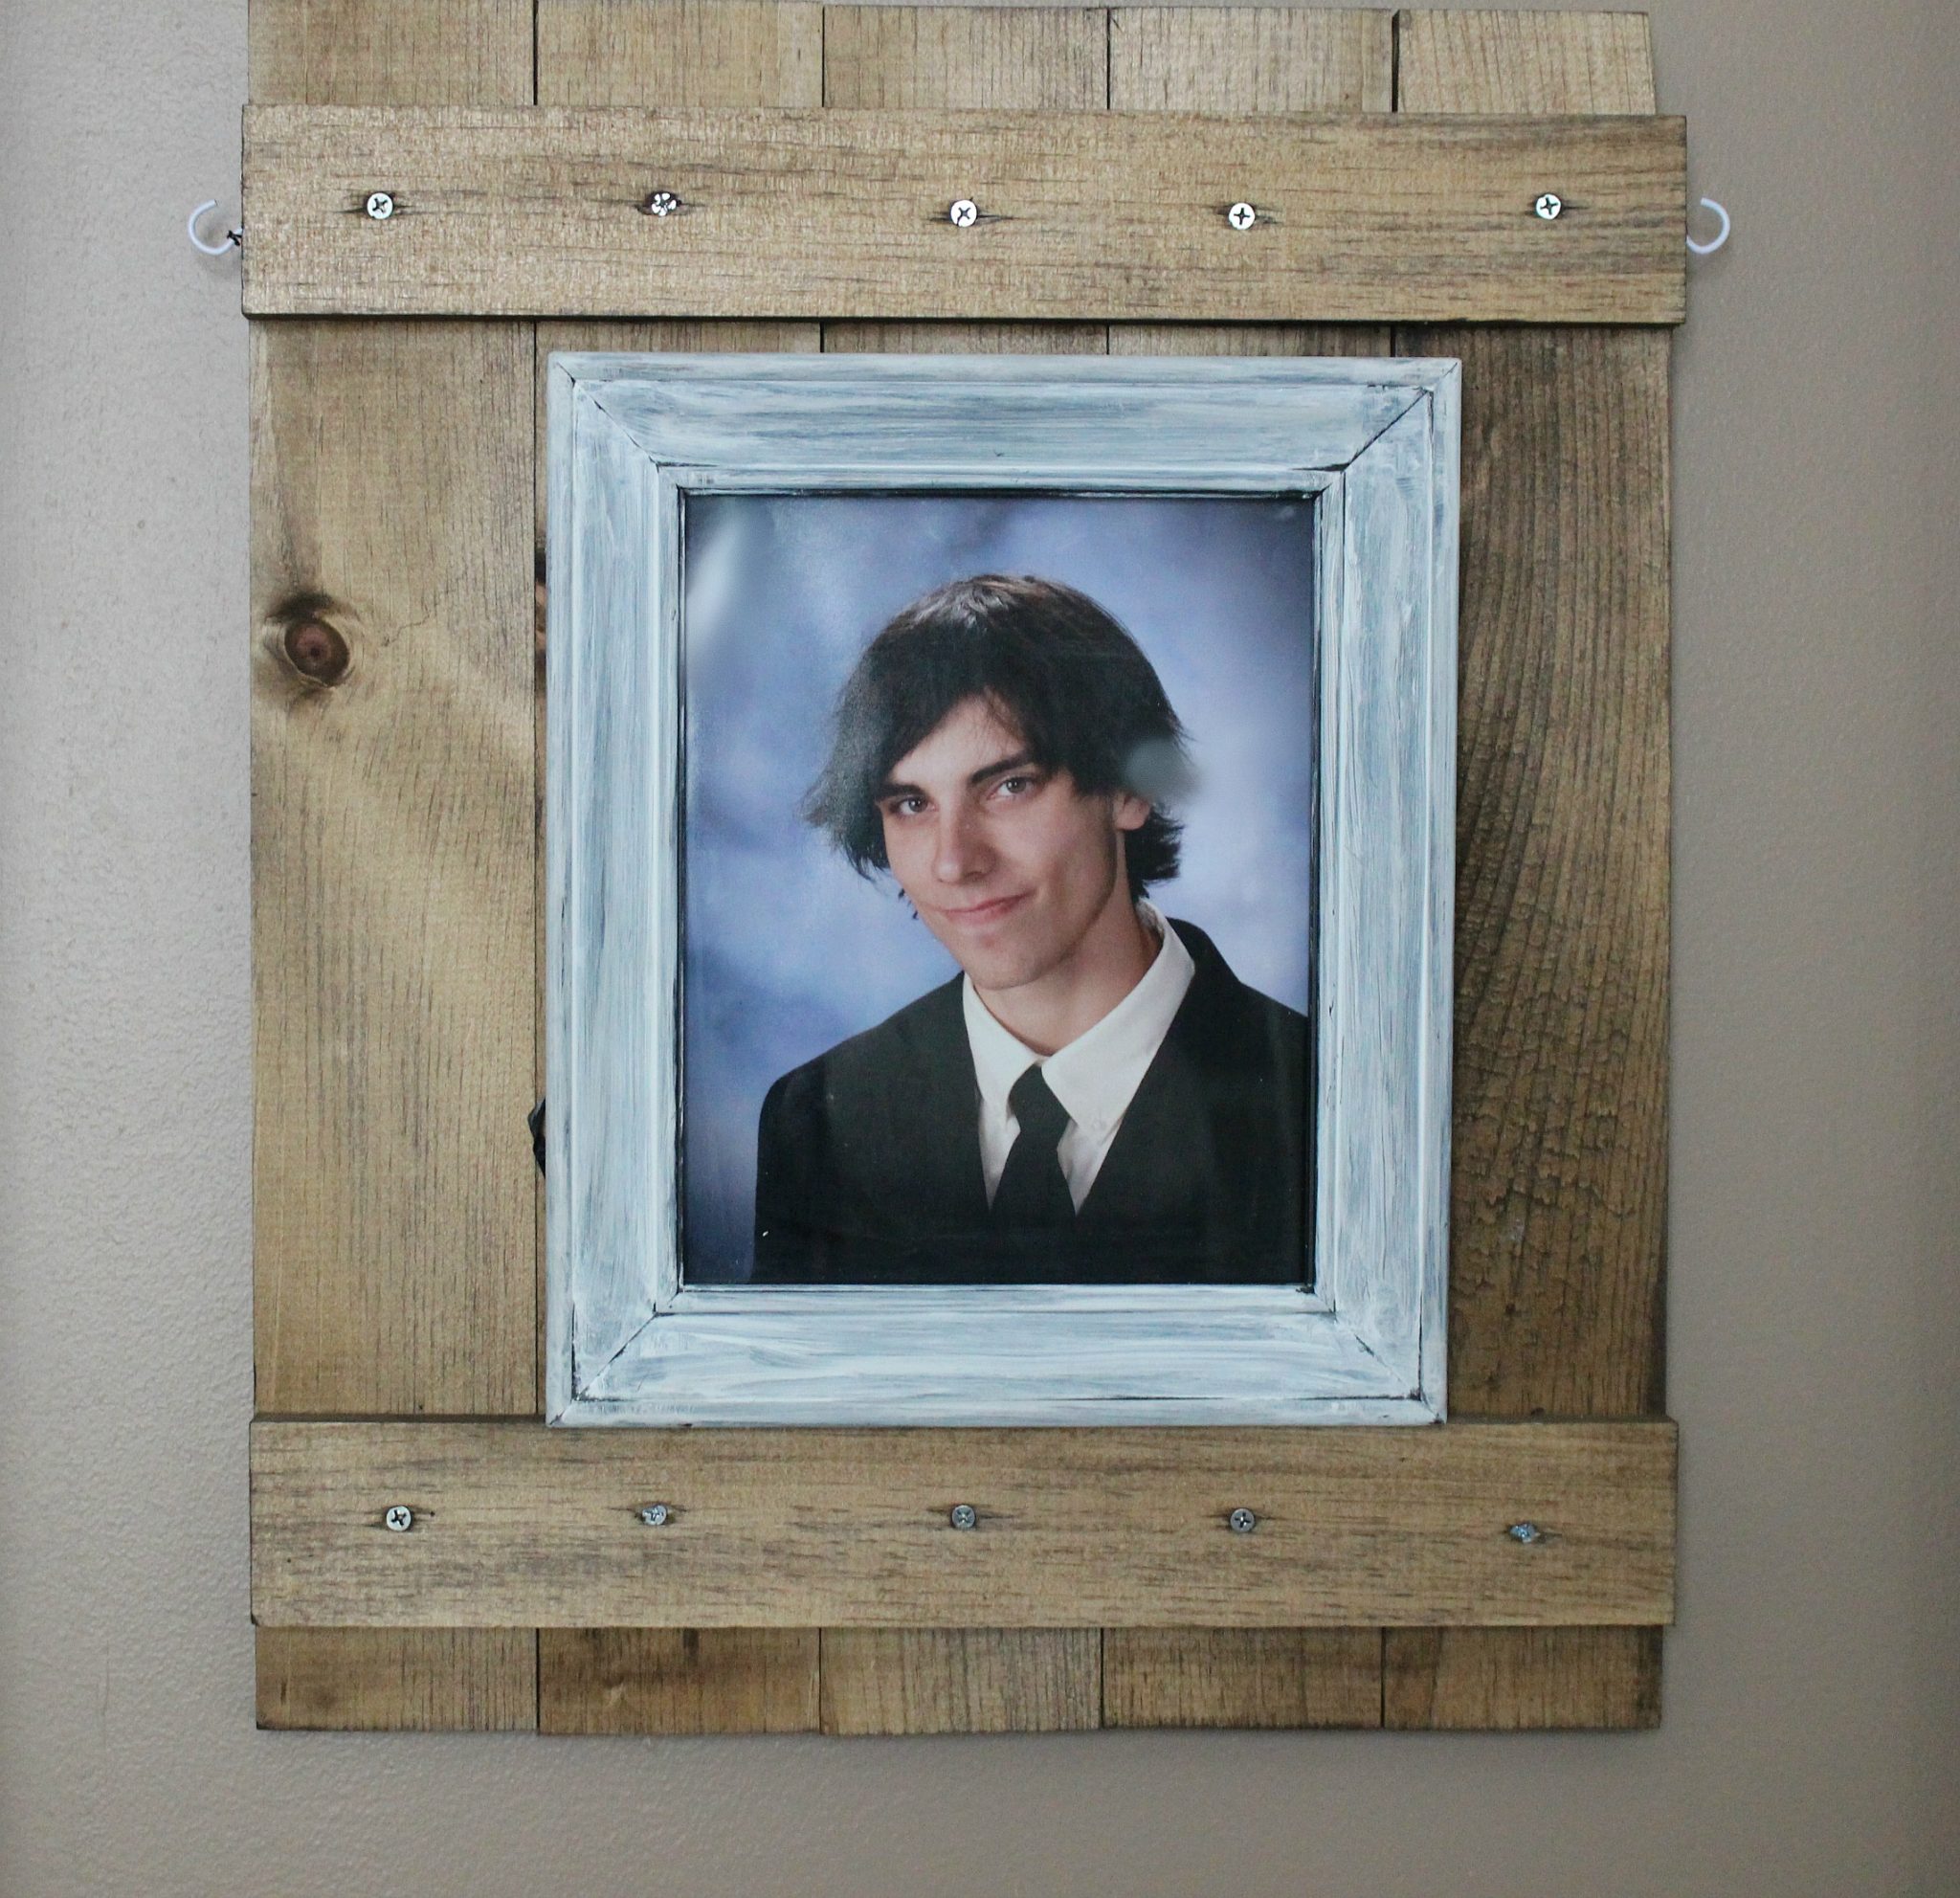 Diy Rustic Frames With S Wood, Diy Rustic Wood Picture Frames